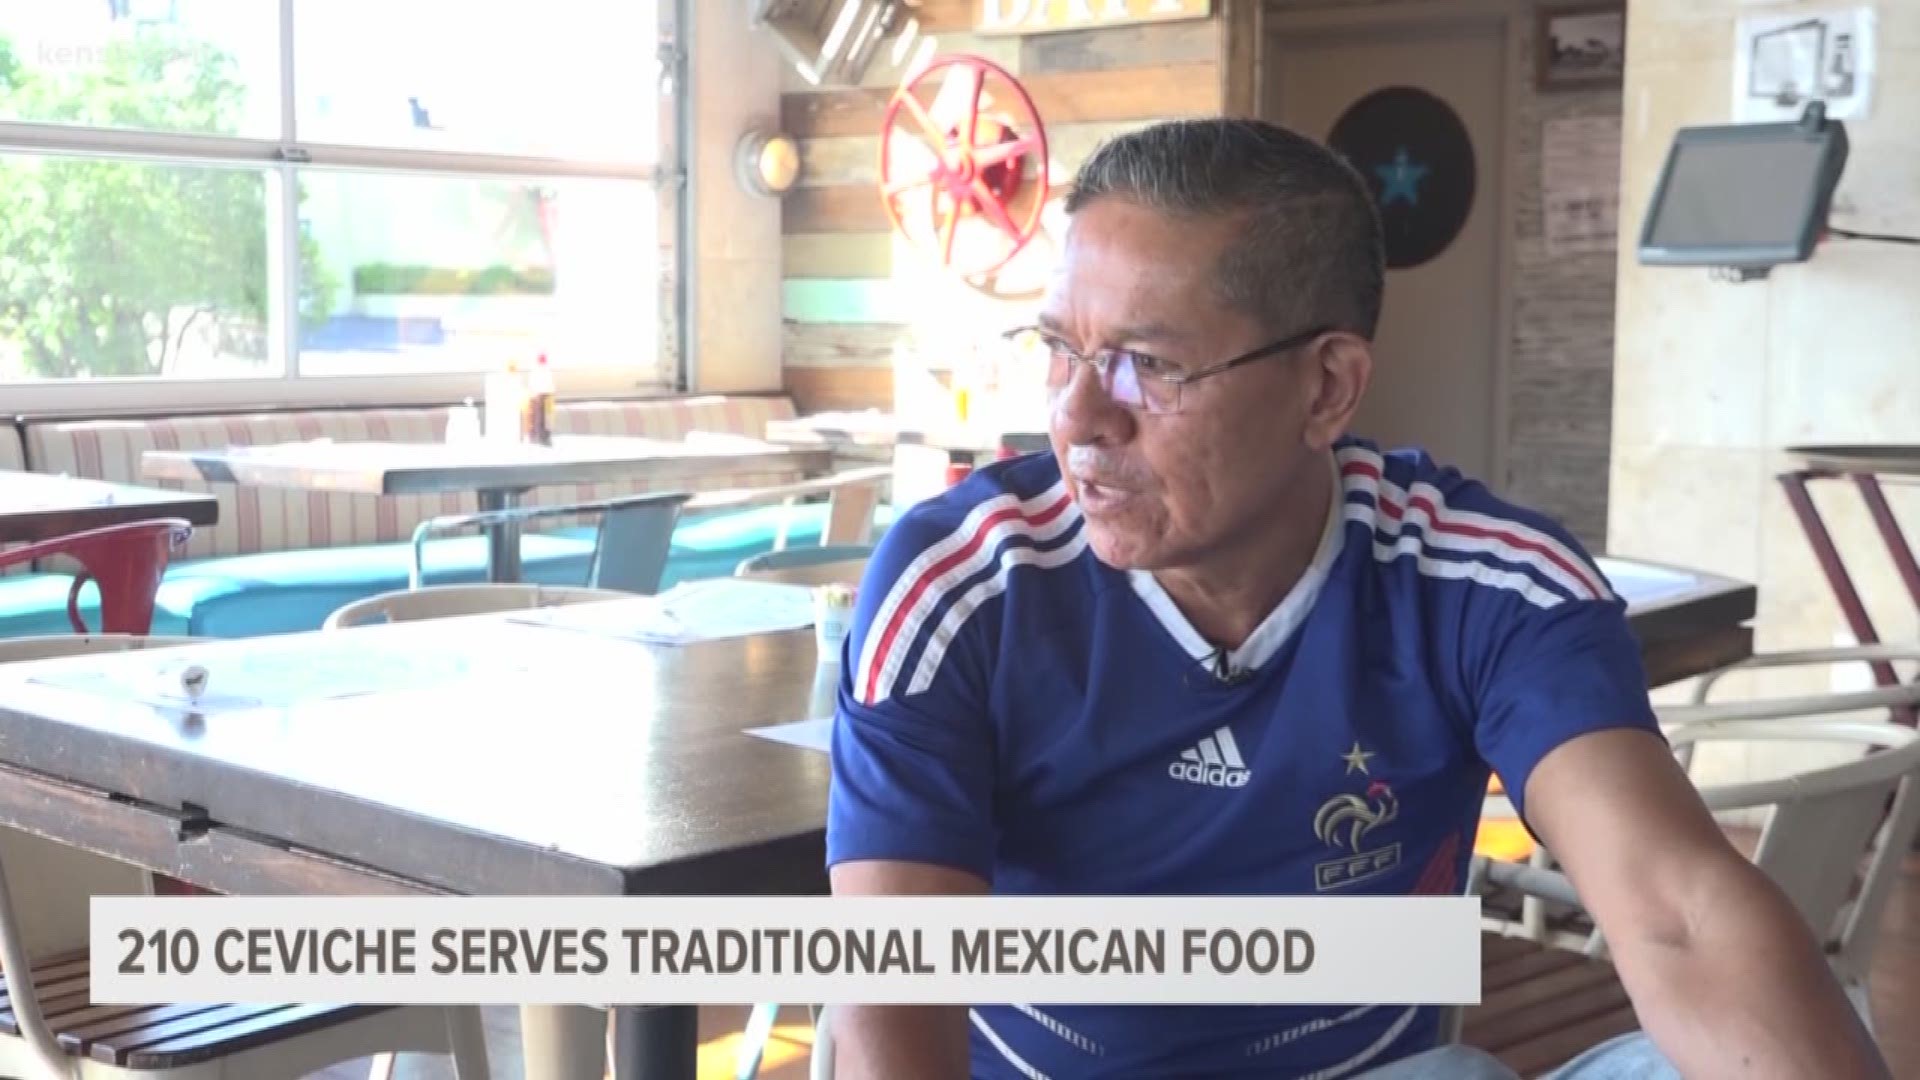 Marvin Hurst talks to the owners of 210 Ceviche, a unique, Mexican-style seafood restaurant on the northwest side. The restaurant's name was inspired by the San Antonio area code of 210.